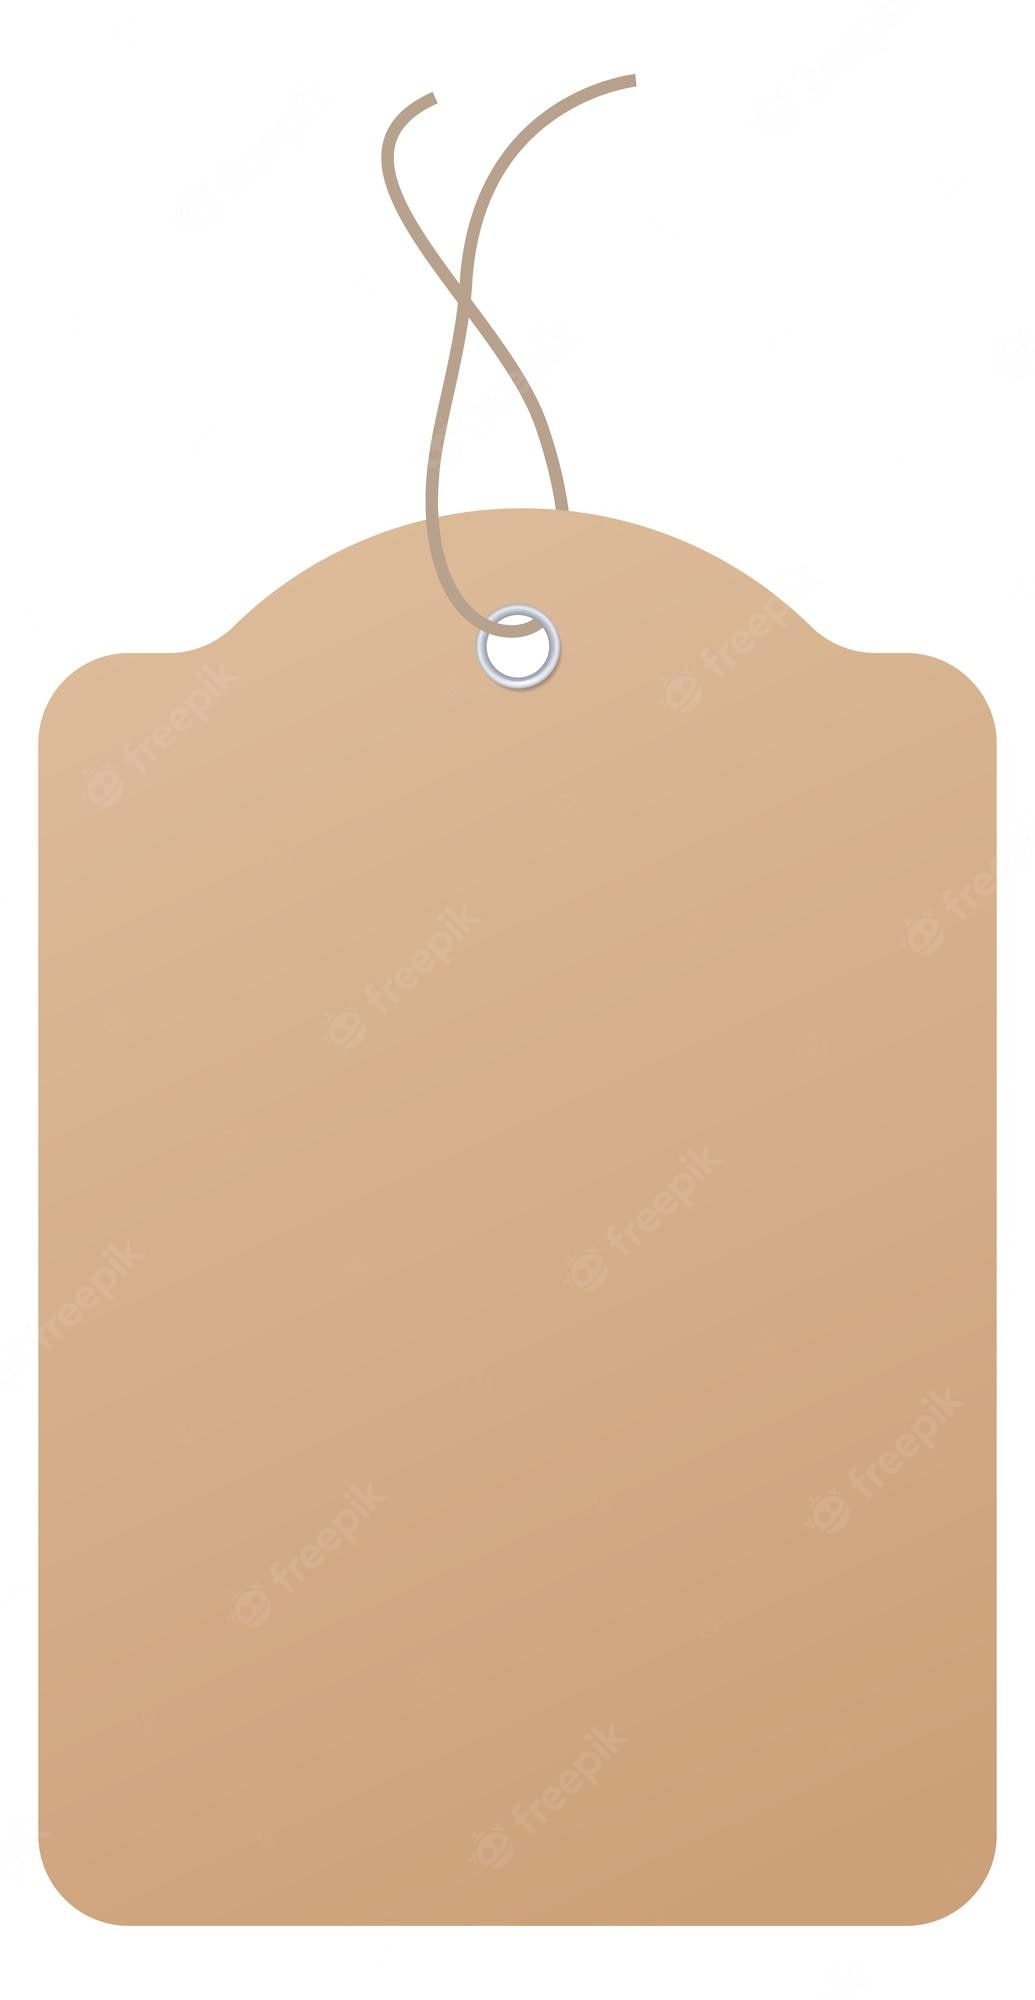 Page 10  Luggage tag template Vectors & Illustrations for Free  For Blank Luggage Tag Template